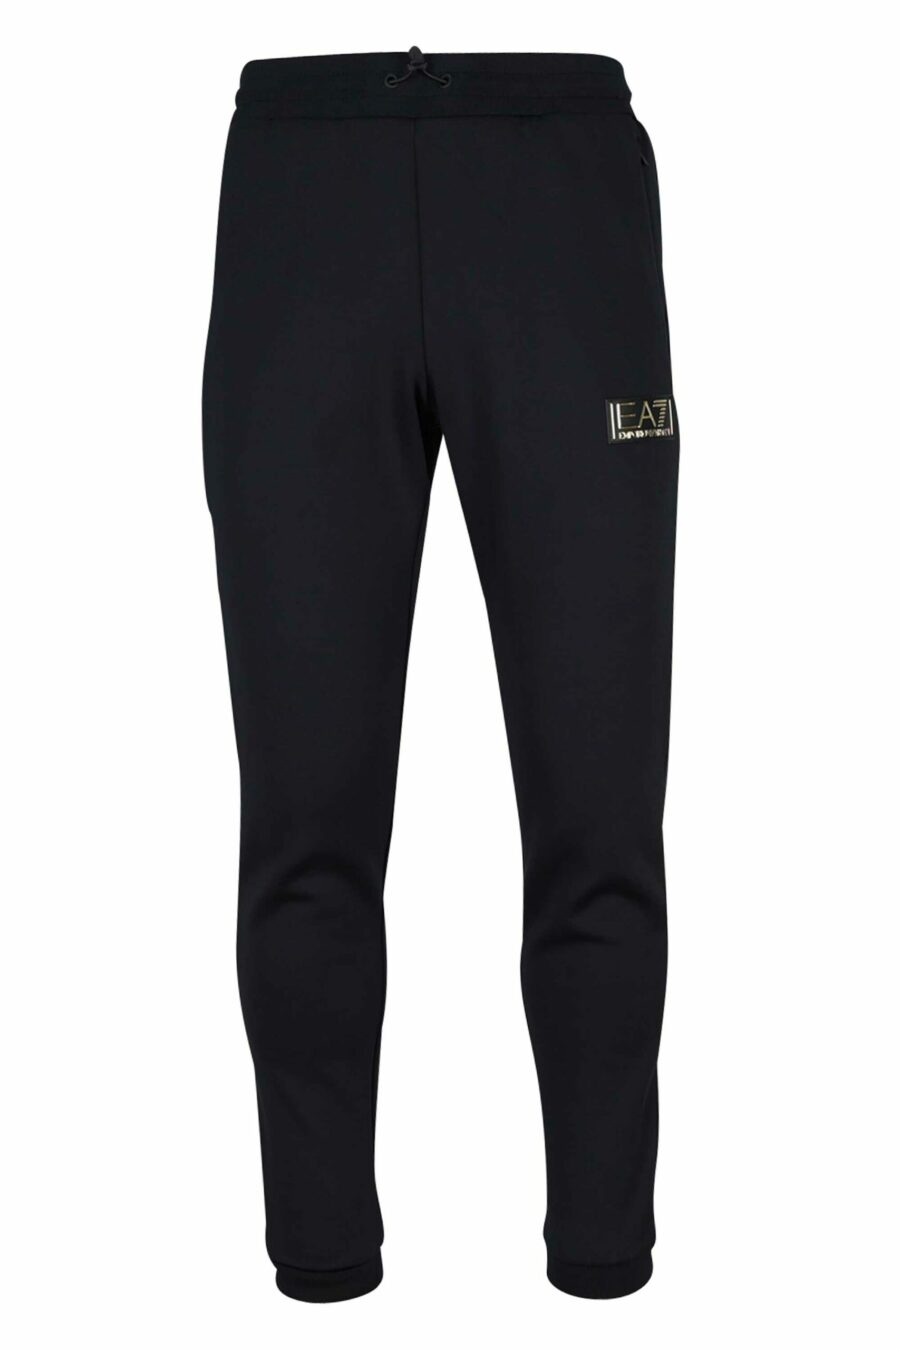 Tracksuit bottoms black with gold "lux identity" logo plaque - 8056787947160 scaled